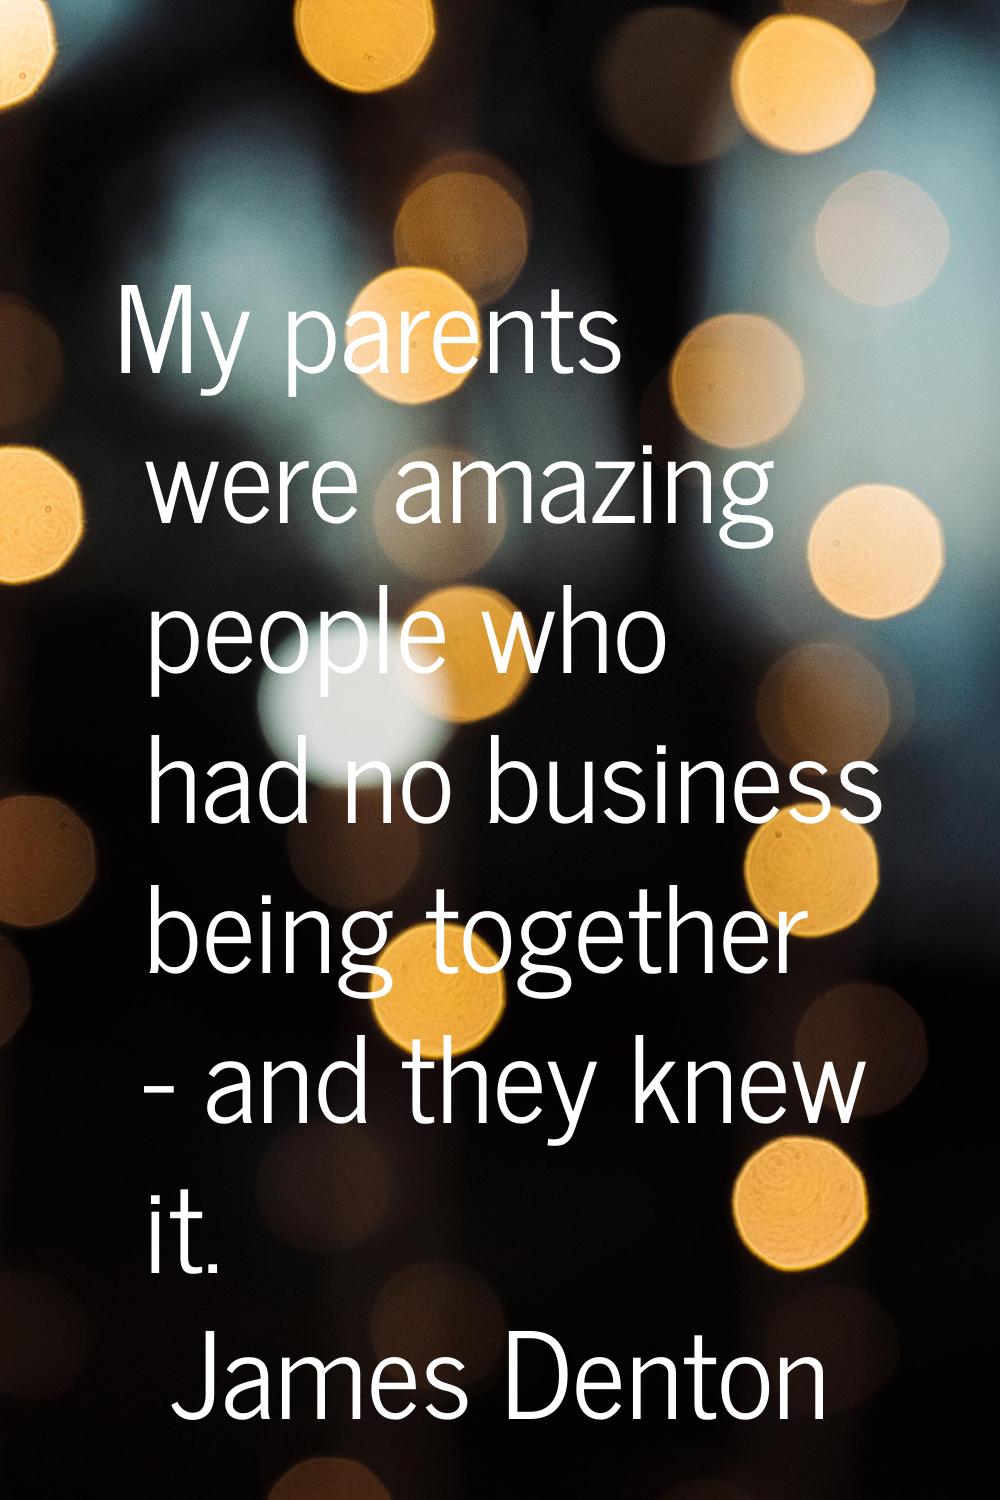 My parents were amazing people who had no business being together - and they knew it.